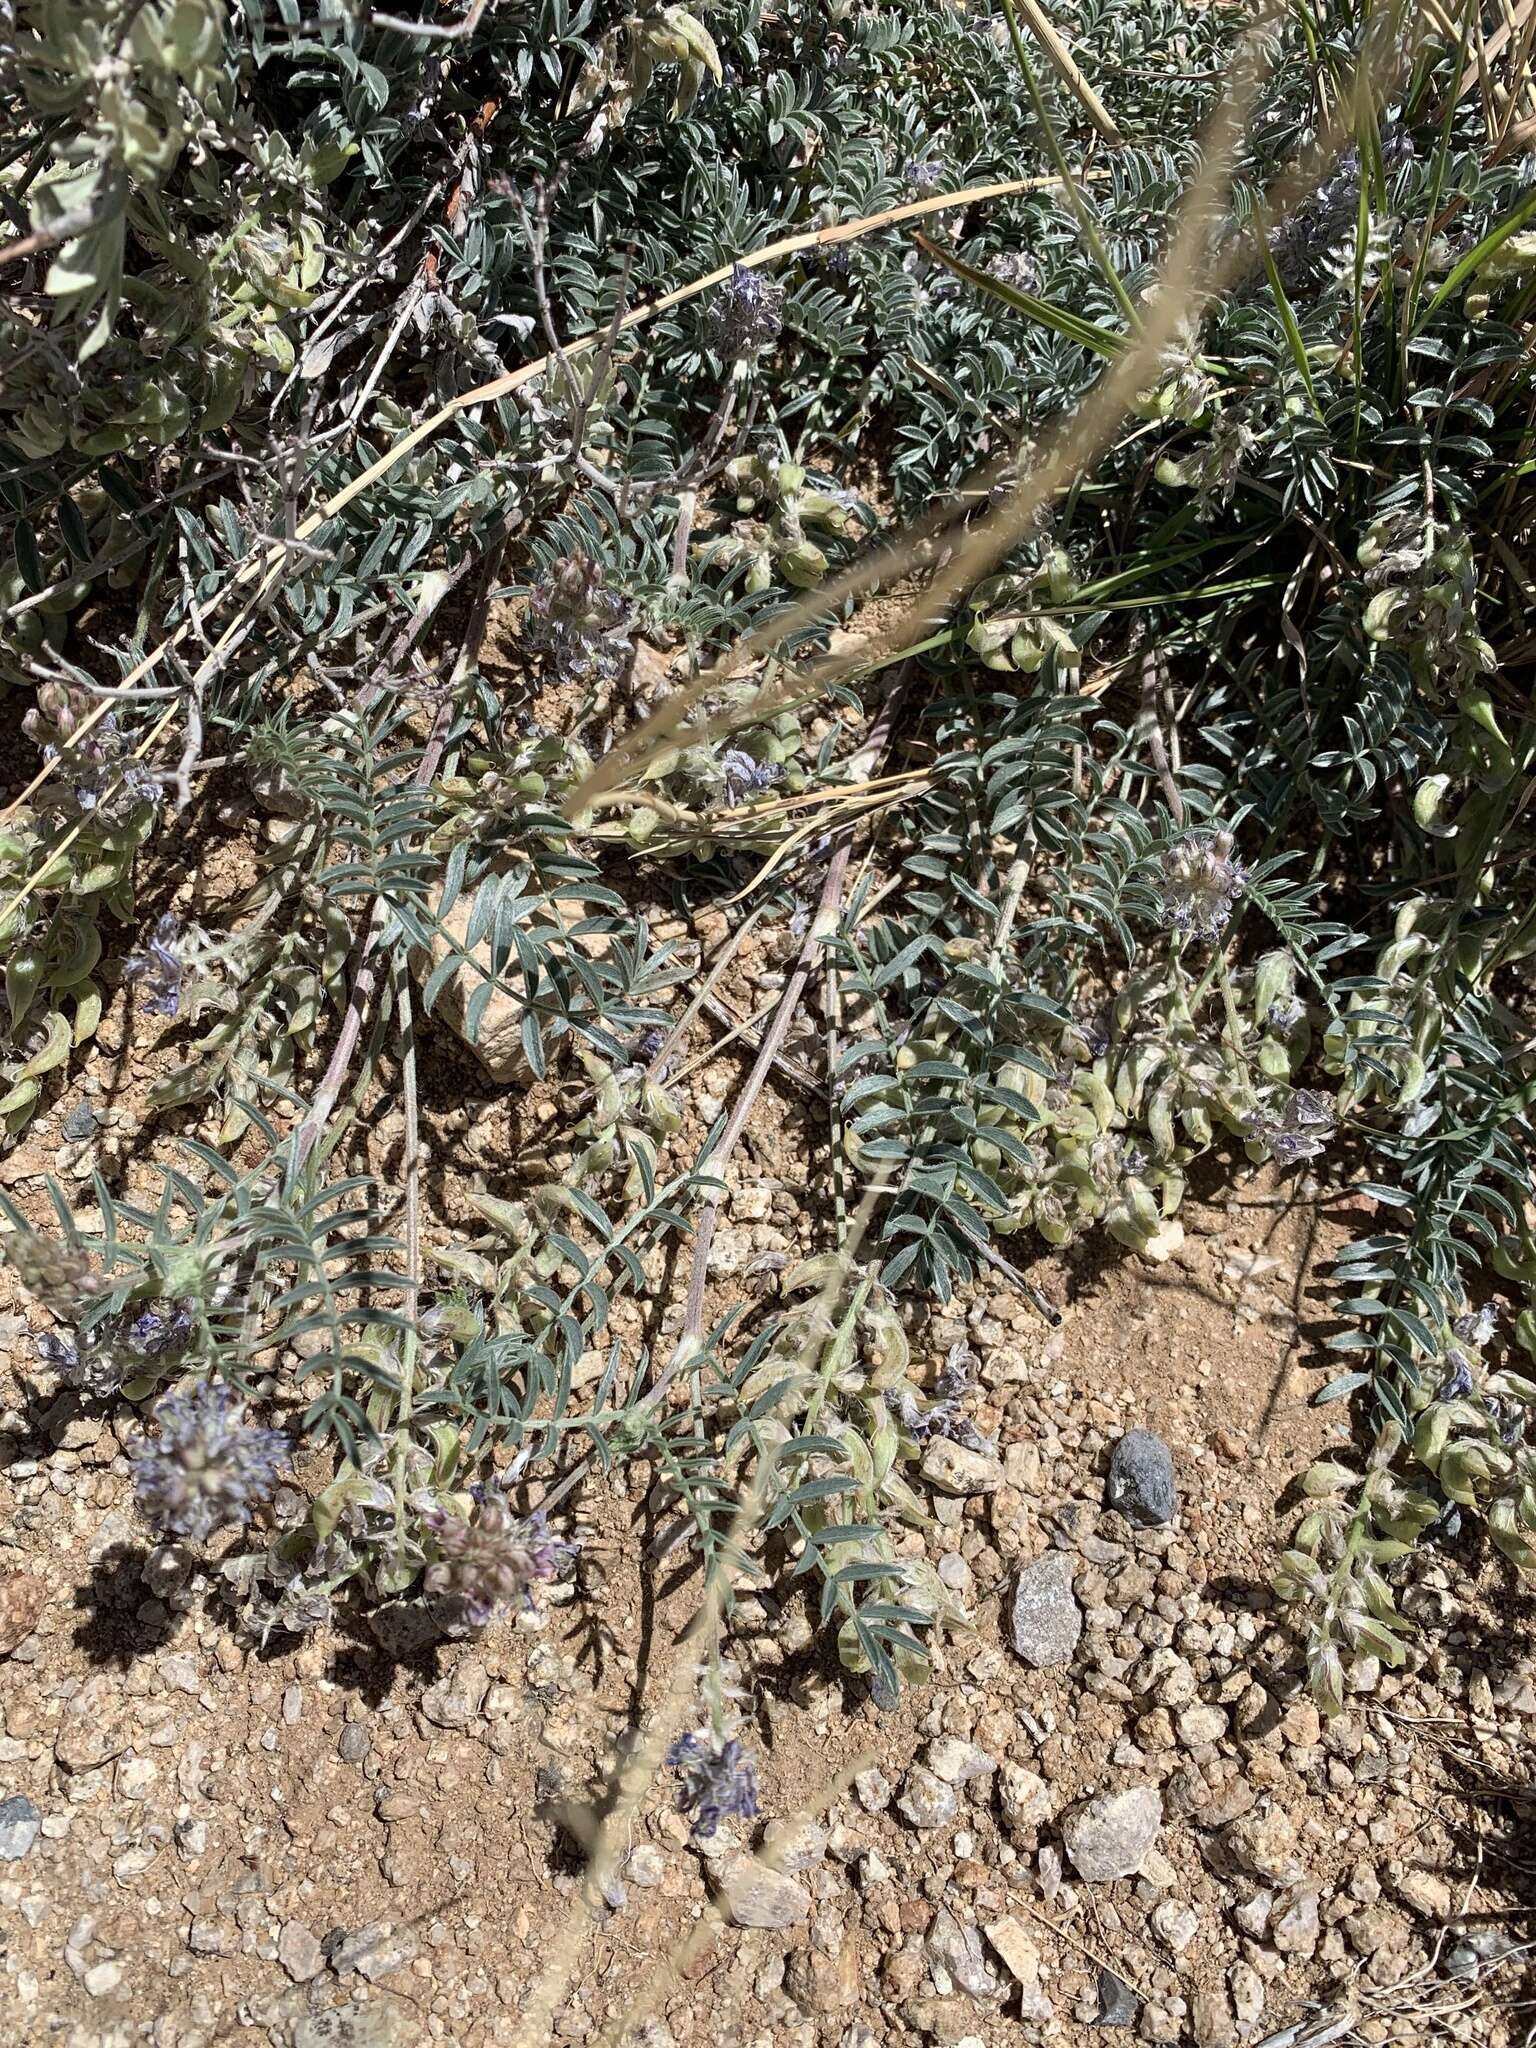 Image of Emory's milkvetch